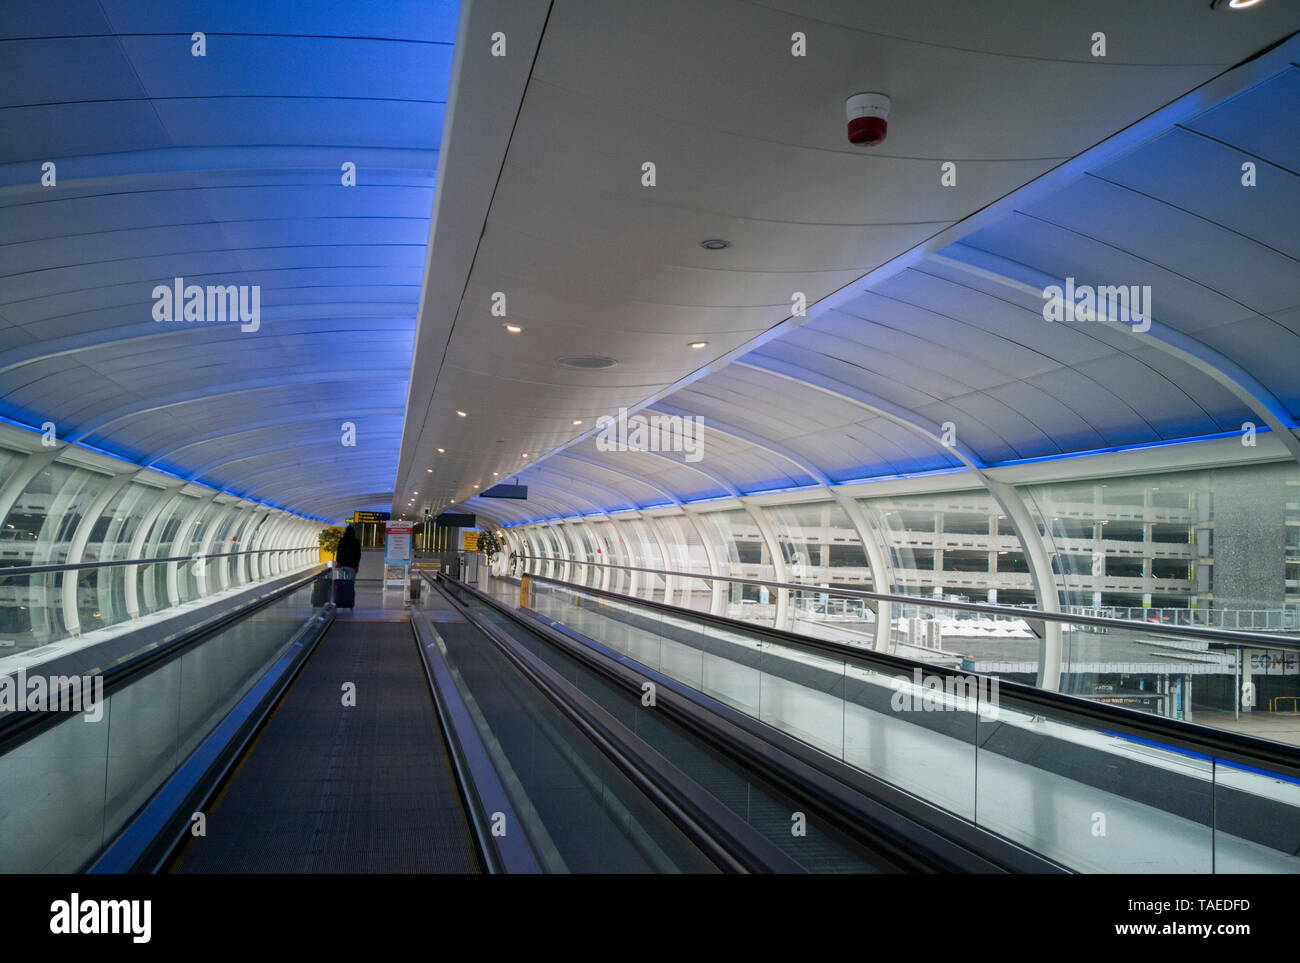 MANCHESTER - JUNE 05: Inside the modern terminal of Manchester Airport June 05, 2018 in Manchester, England Stock Photo